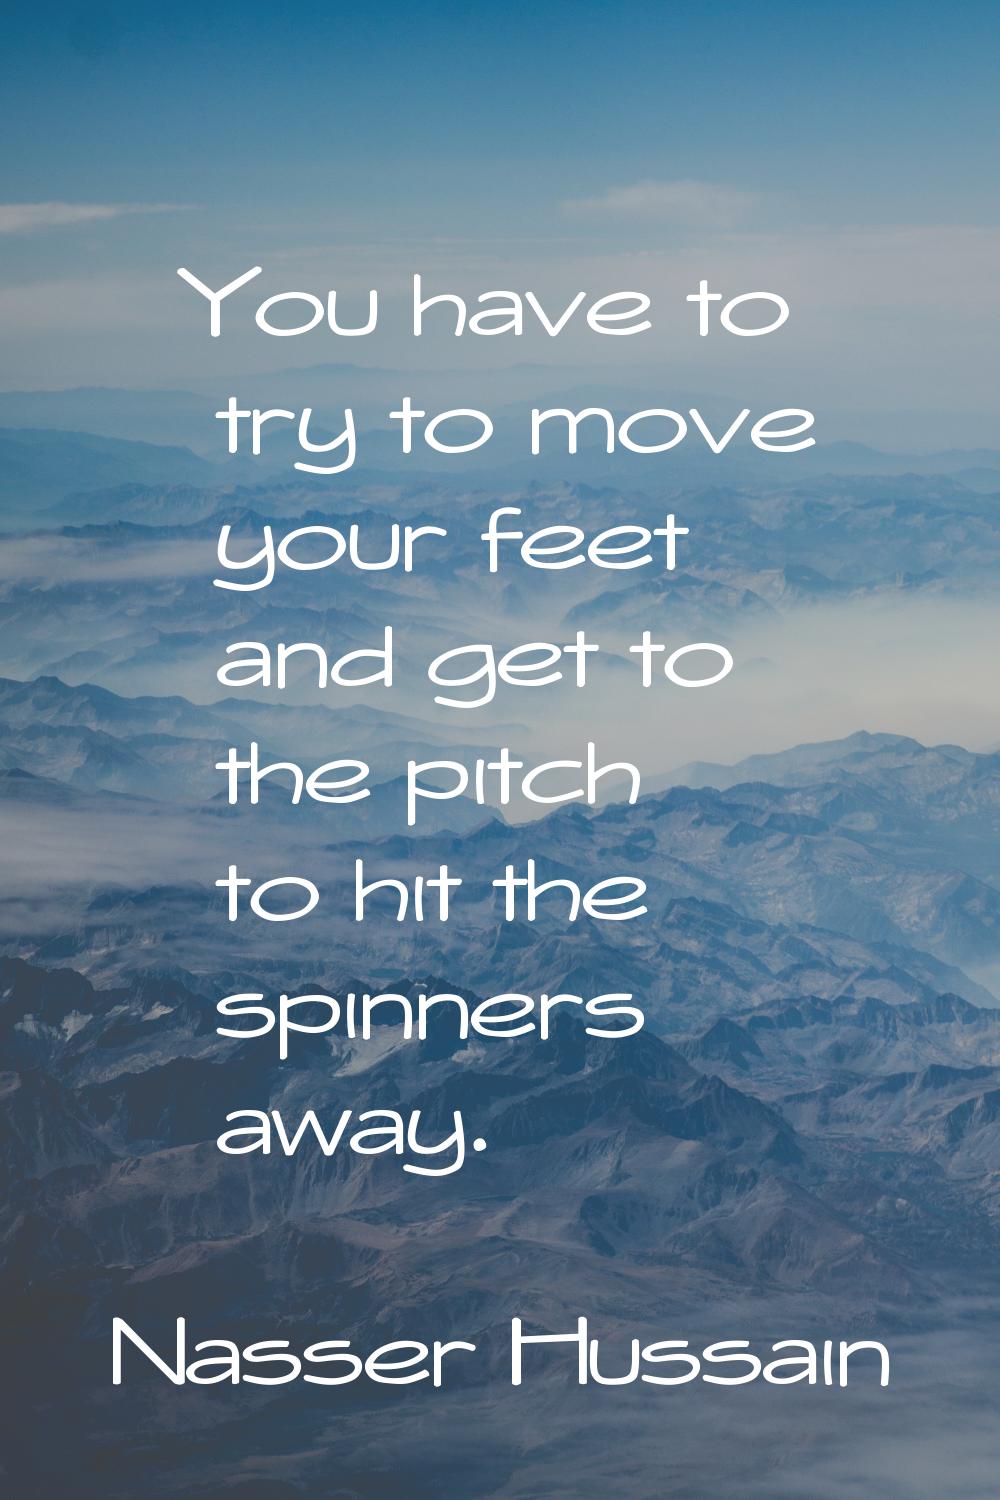 You have to try to move your feet and get to the pitch to hit the spinners away.